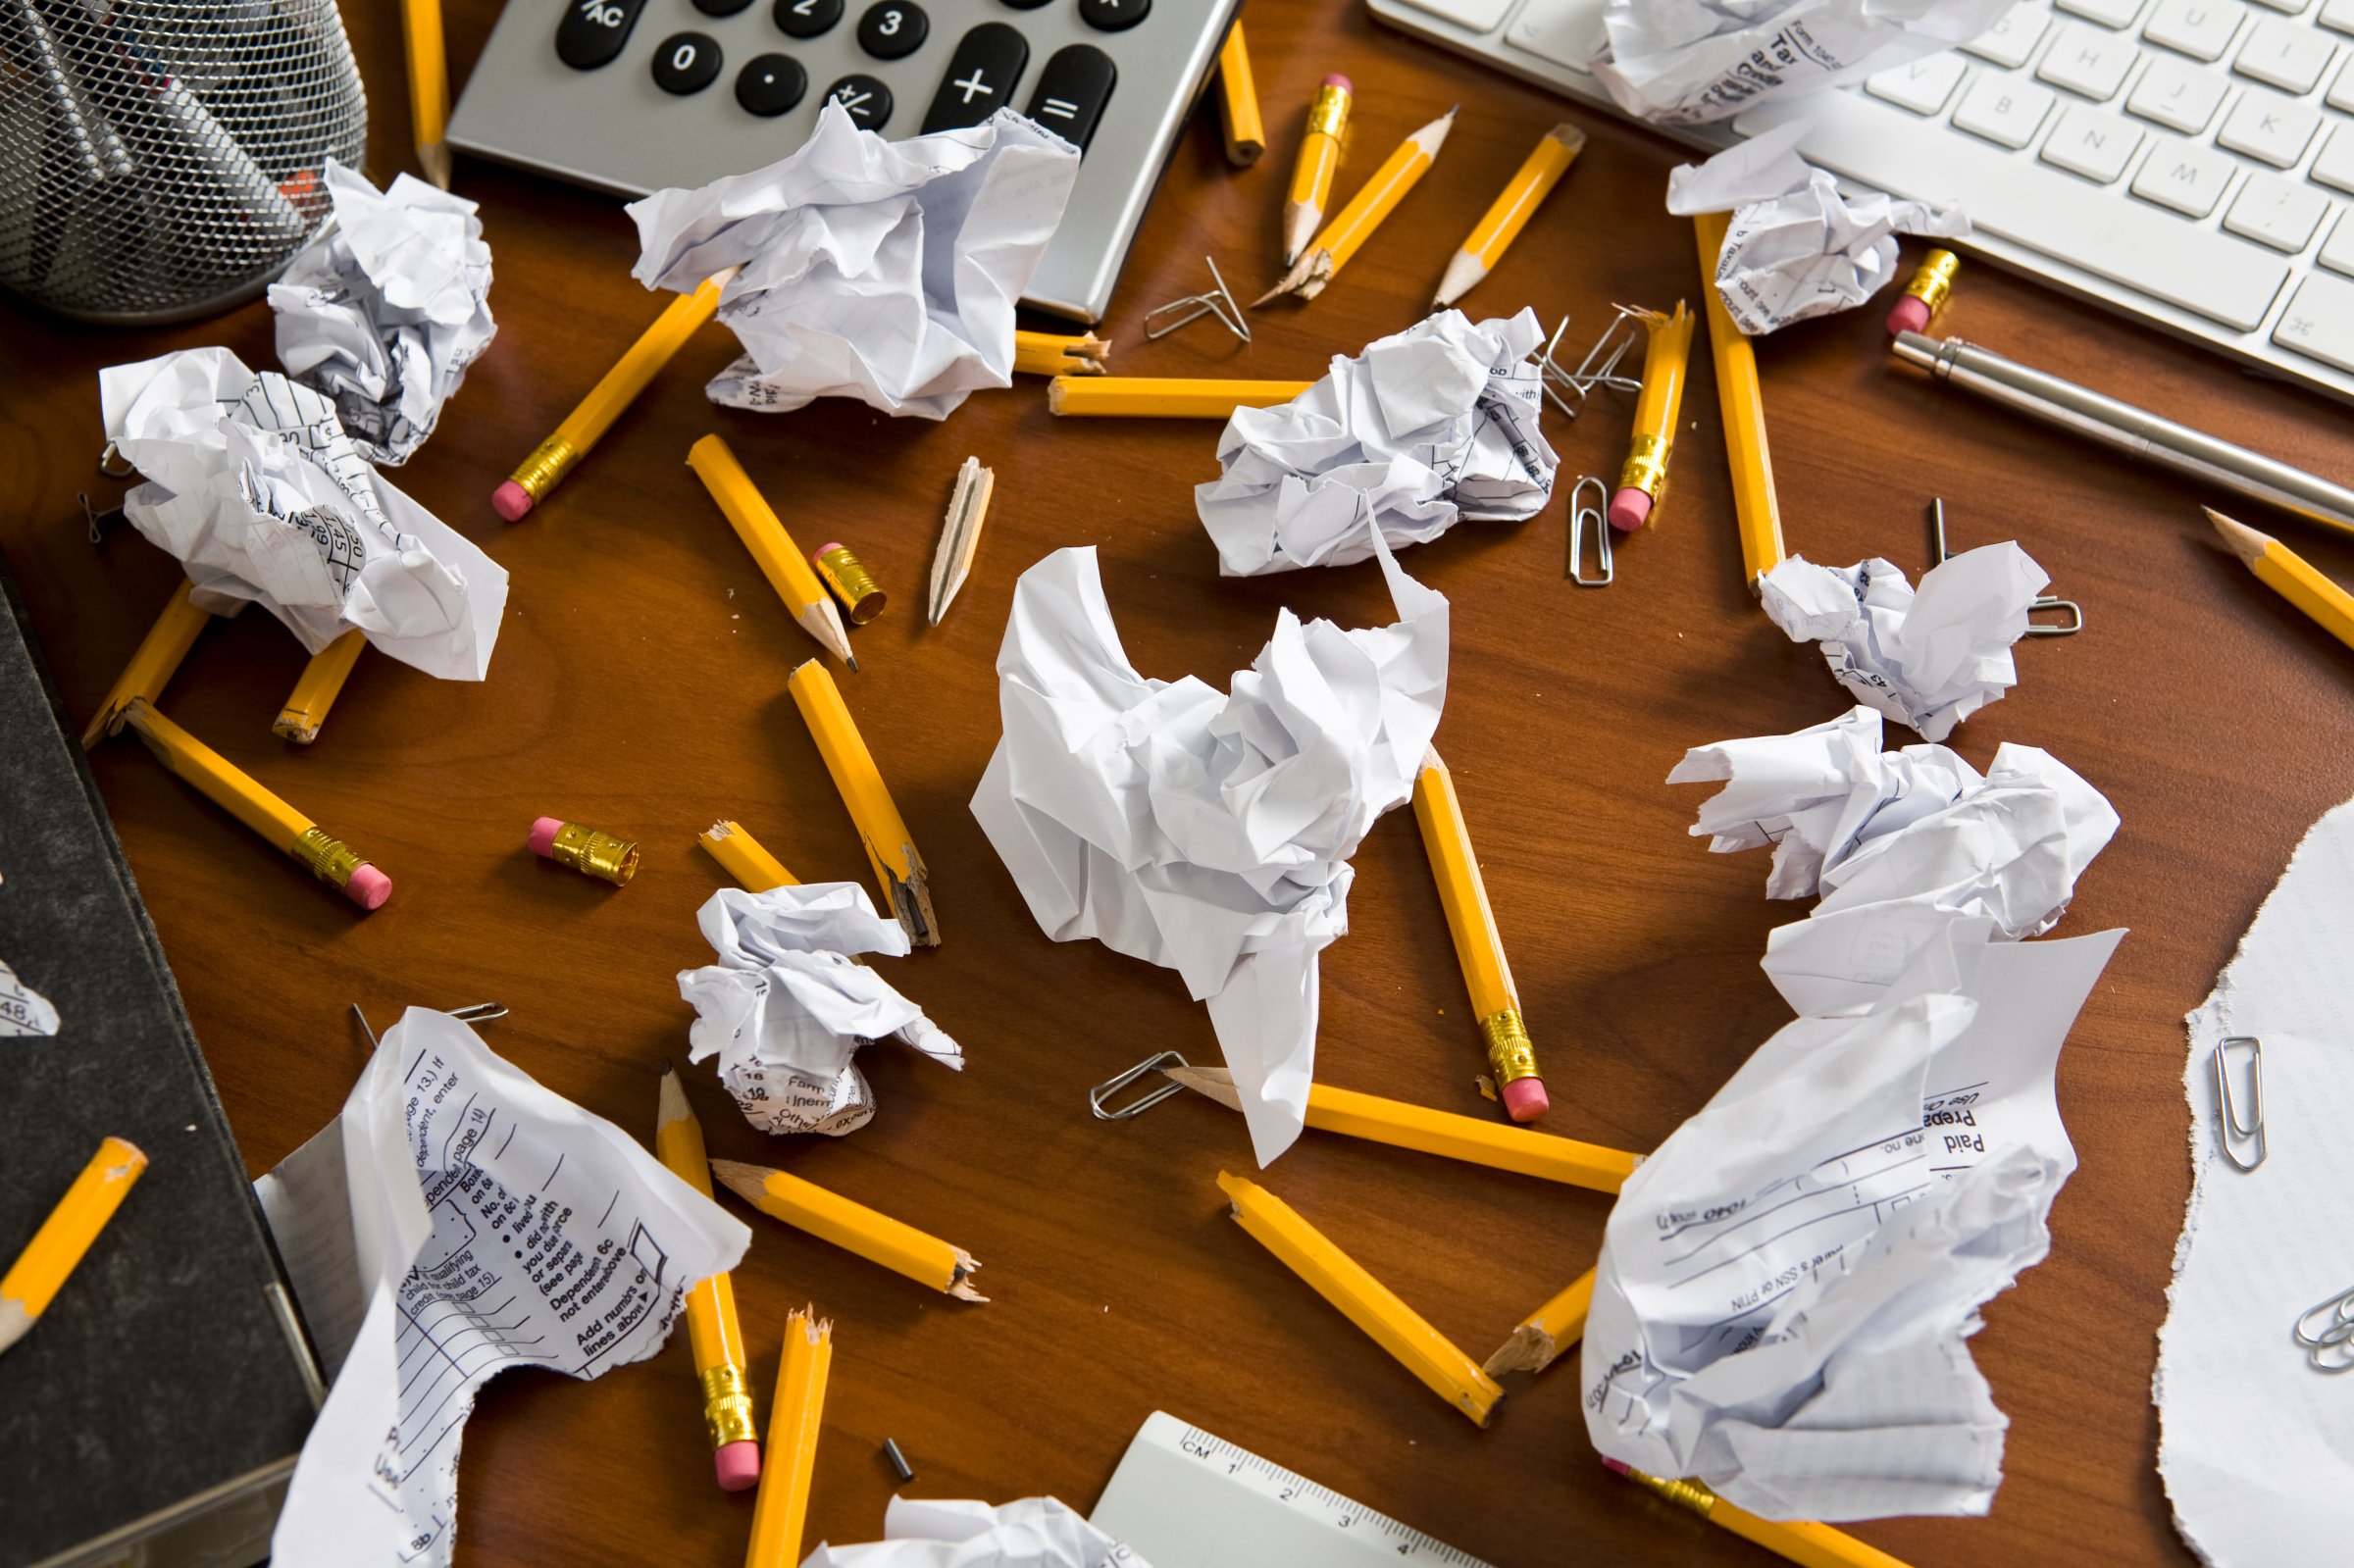 An office desk cluttered with pencils and crumpled paper